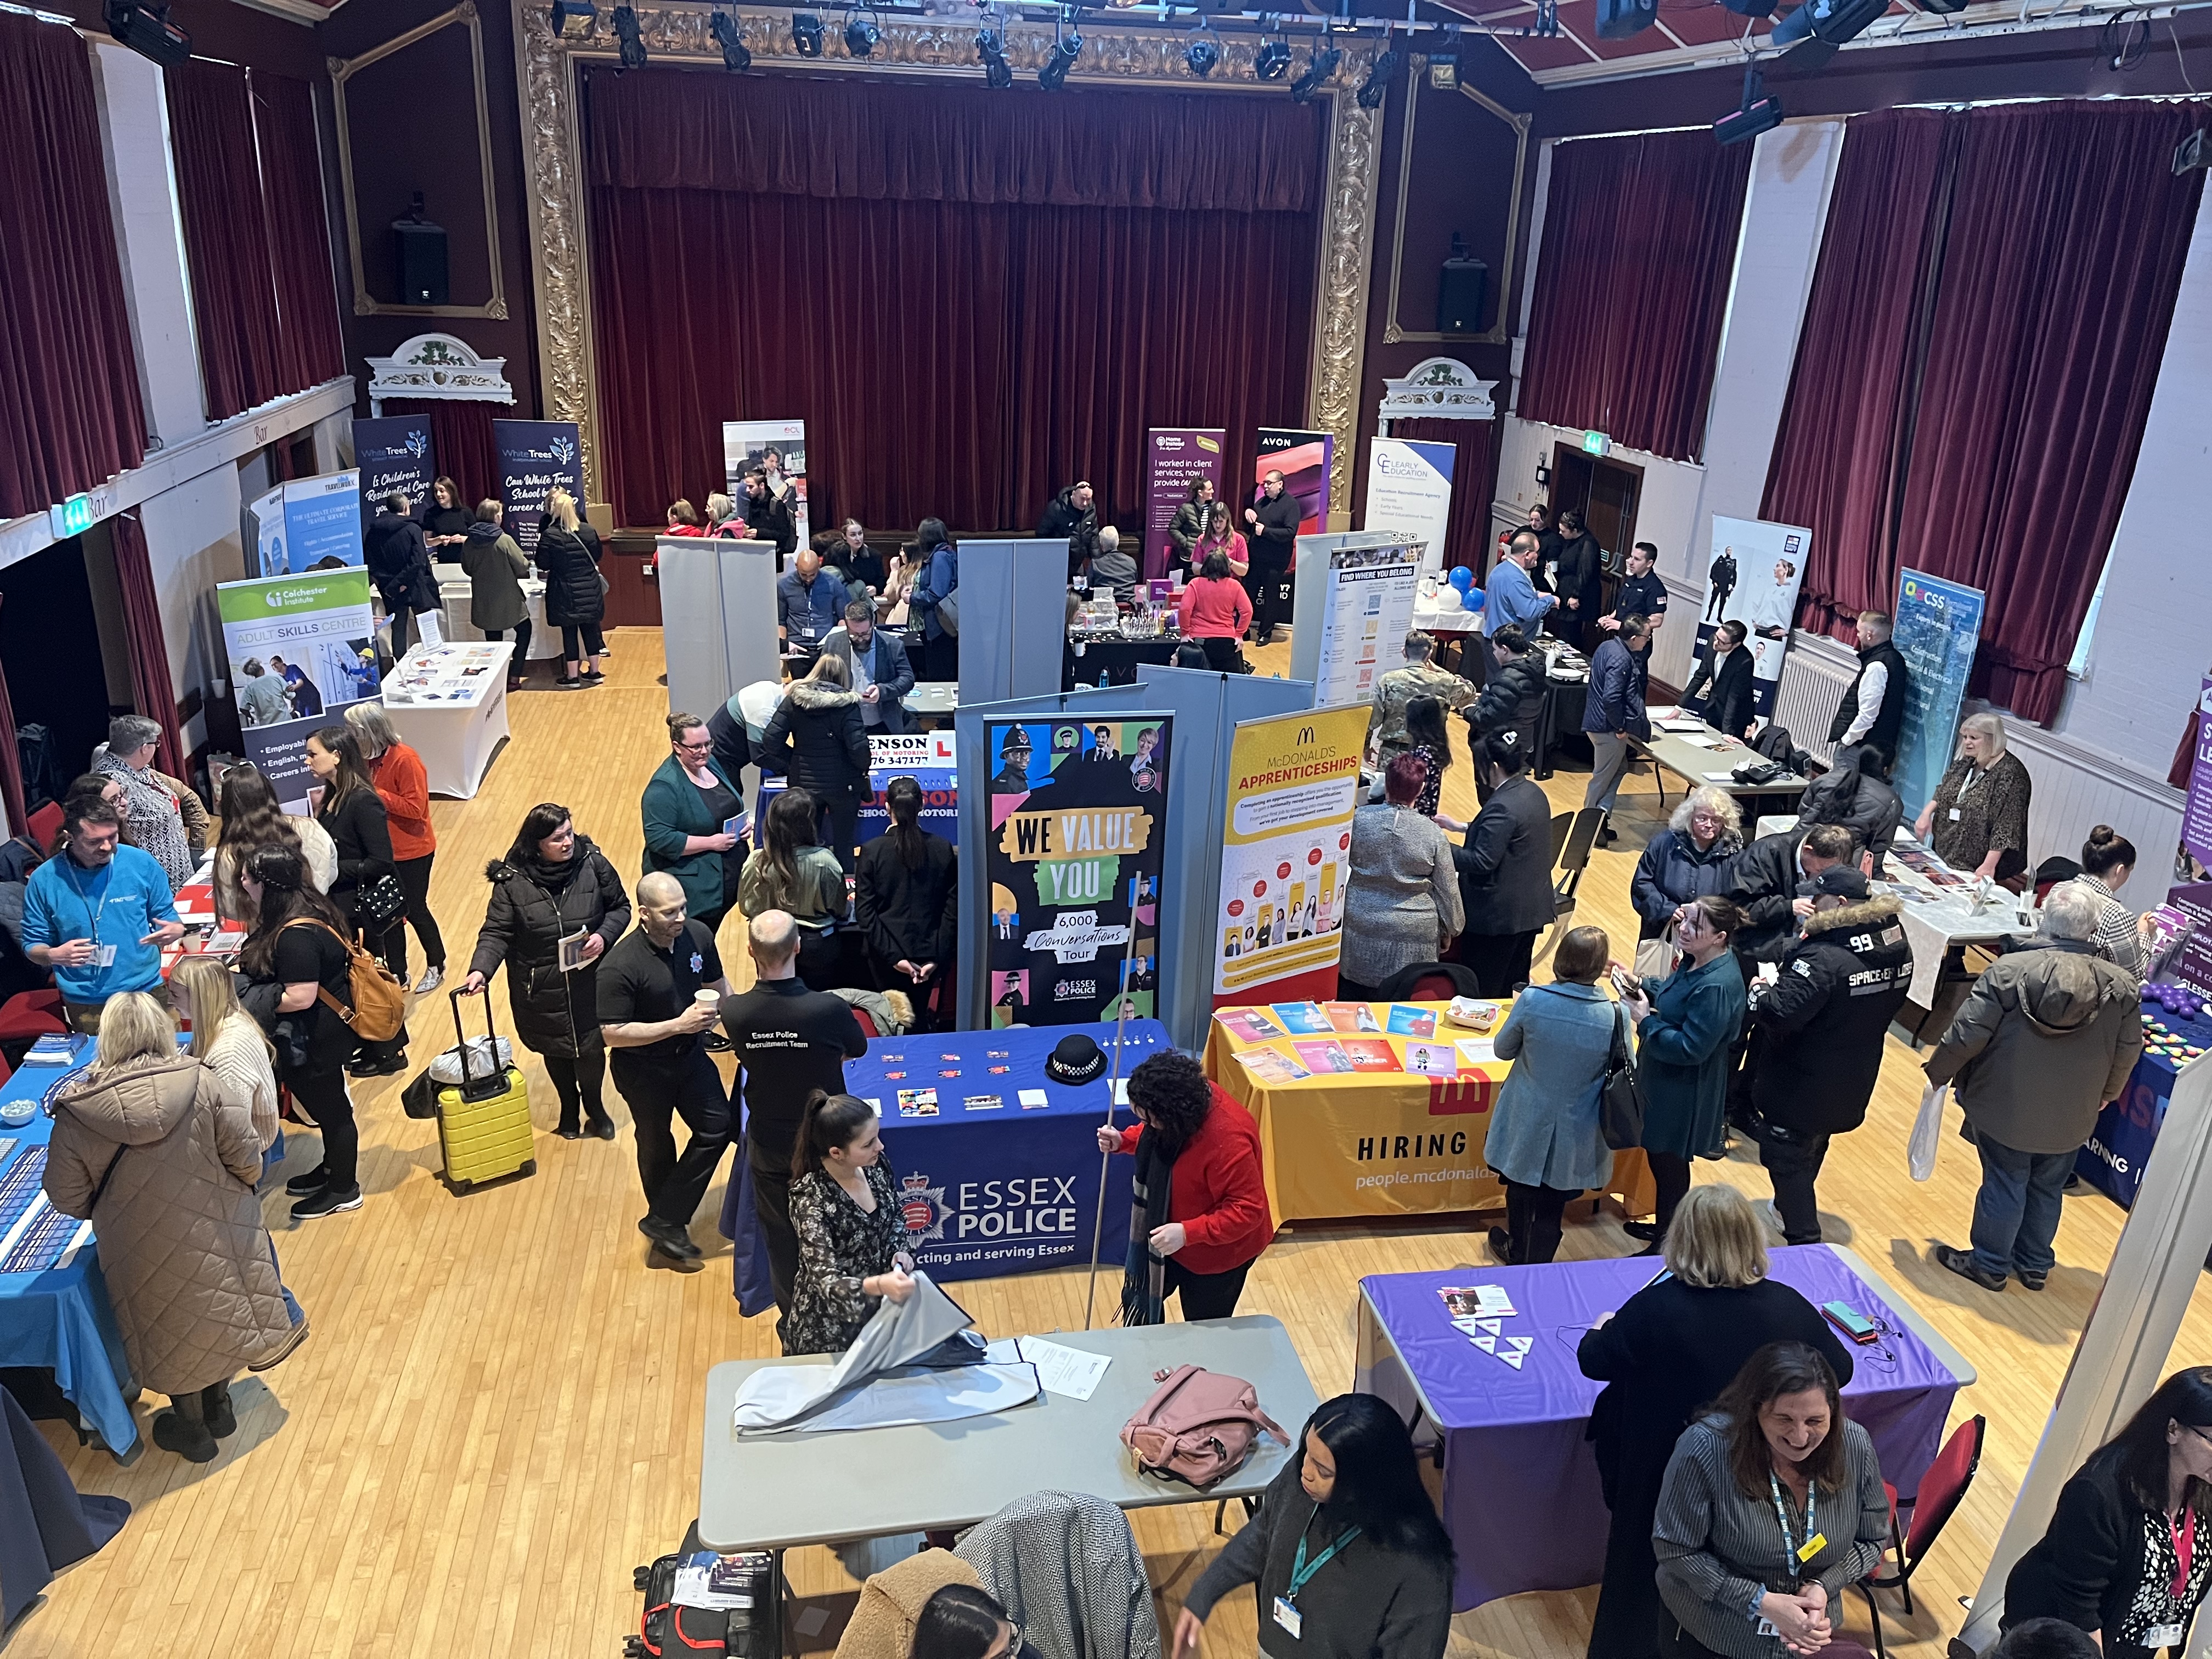 Shot from above of Witham Job Fair